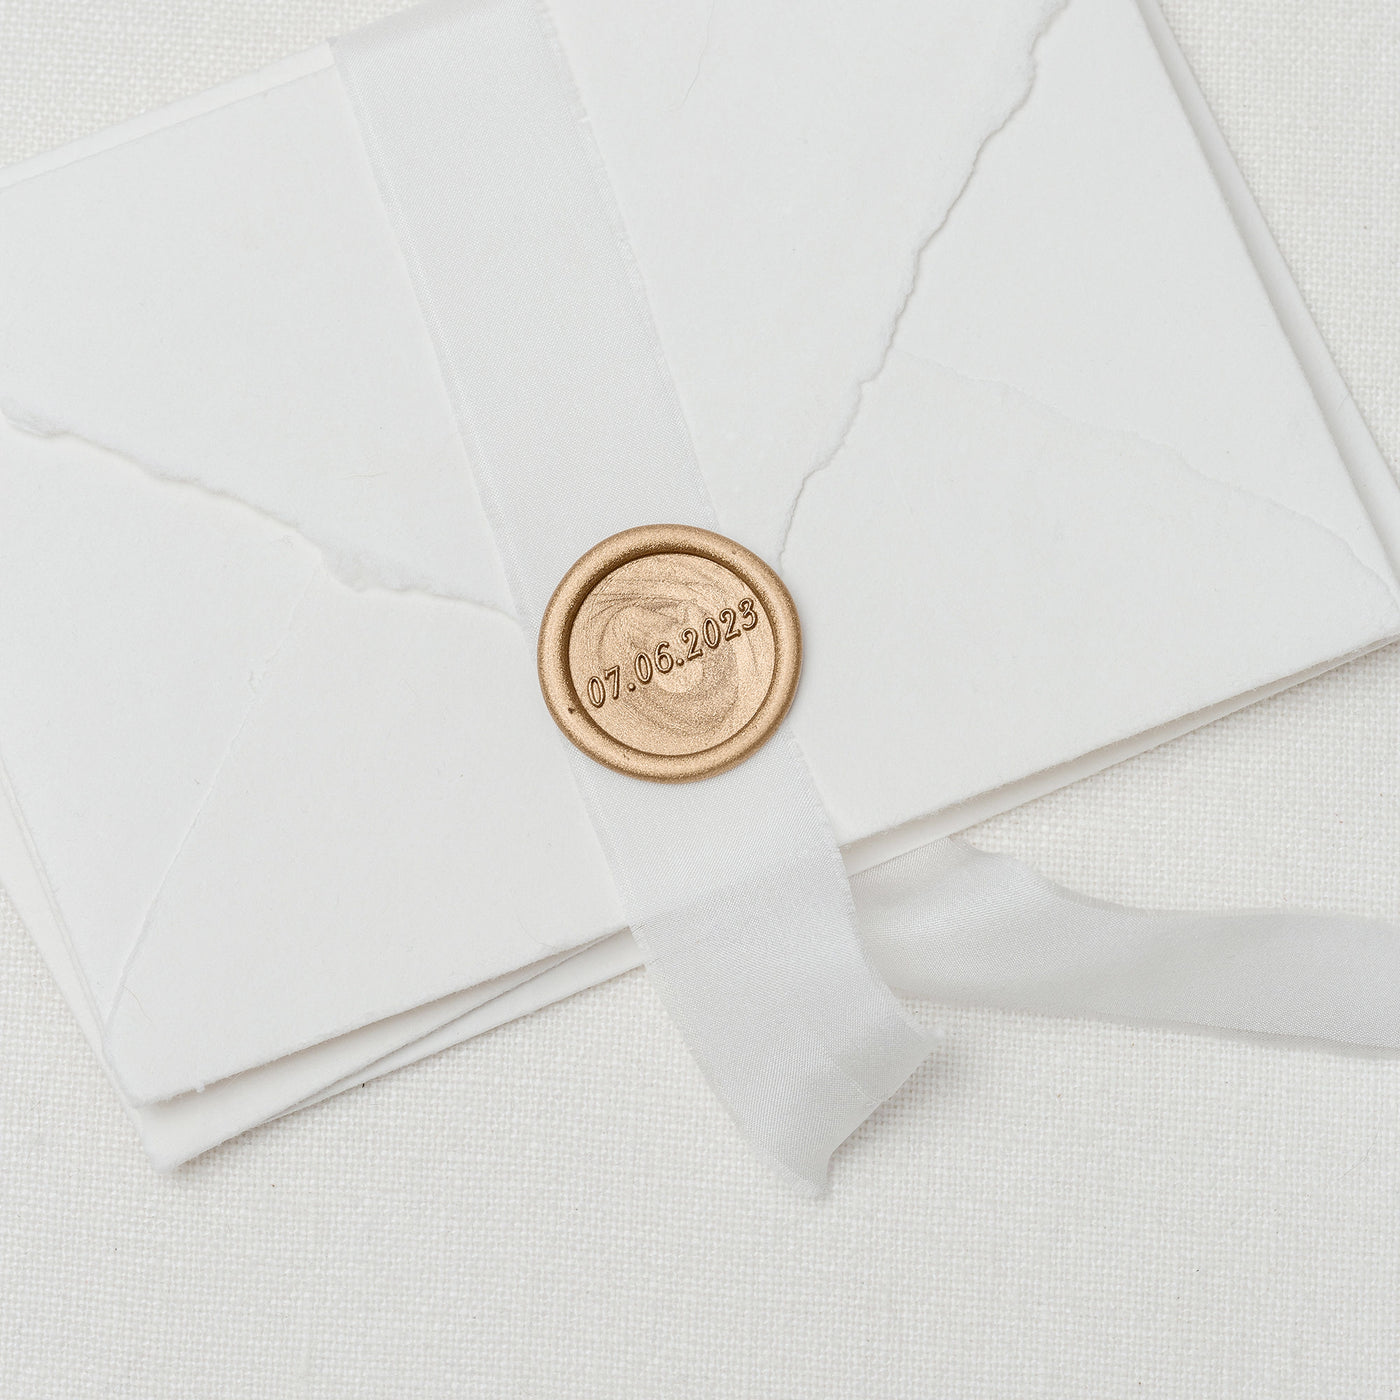 SAVE THE DATE SCRIPT WAX SEAL STAMP - WORTH THE WAIT